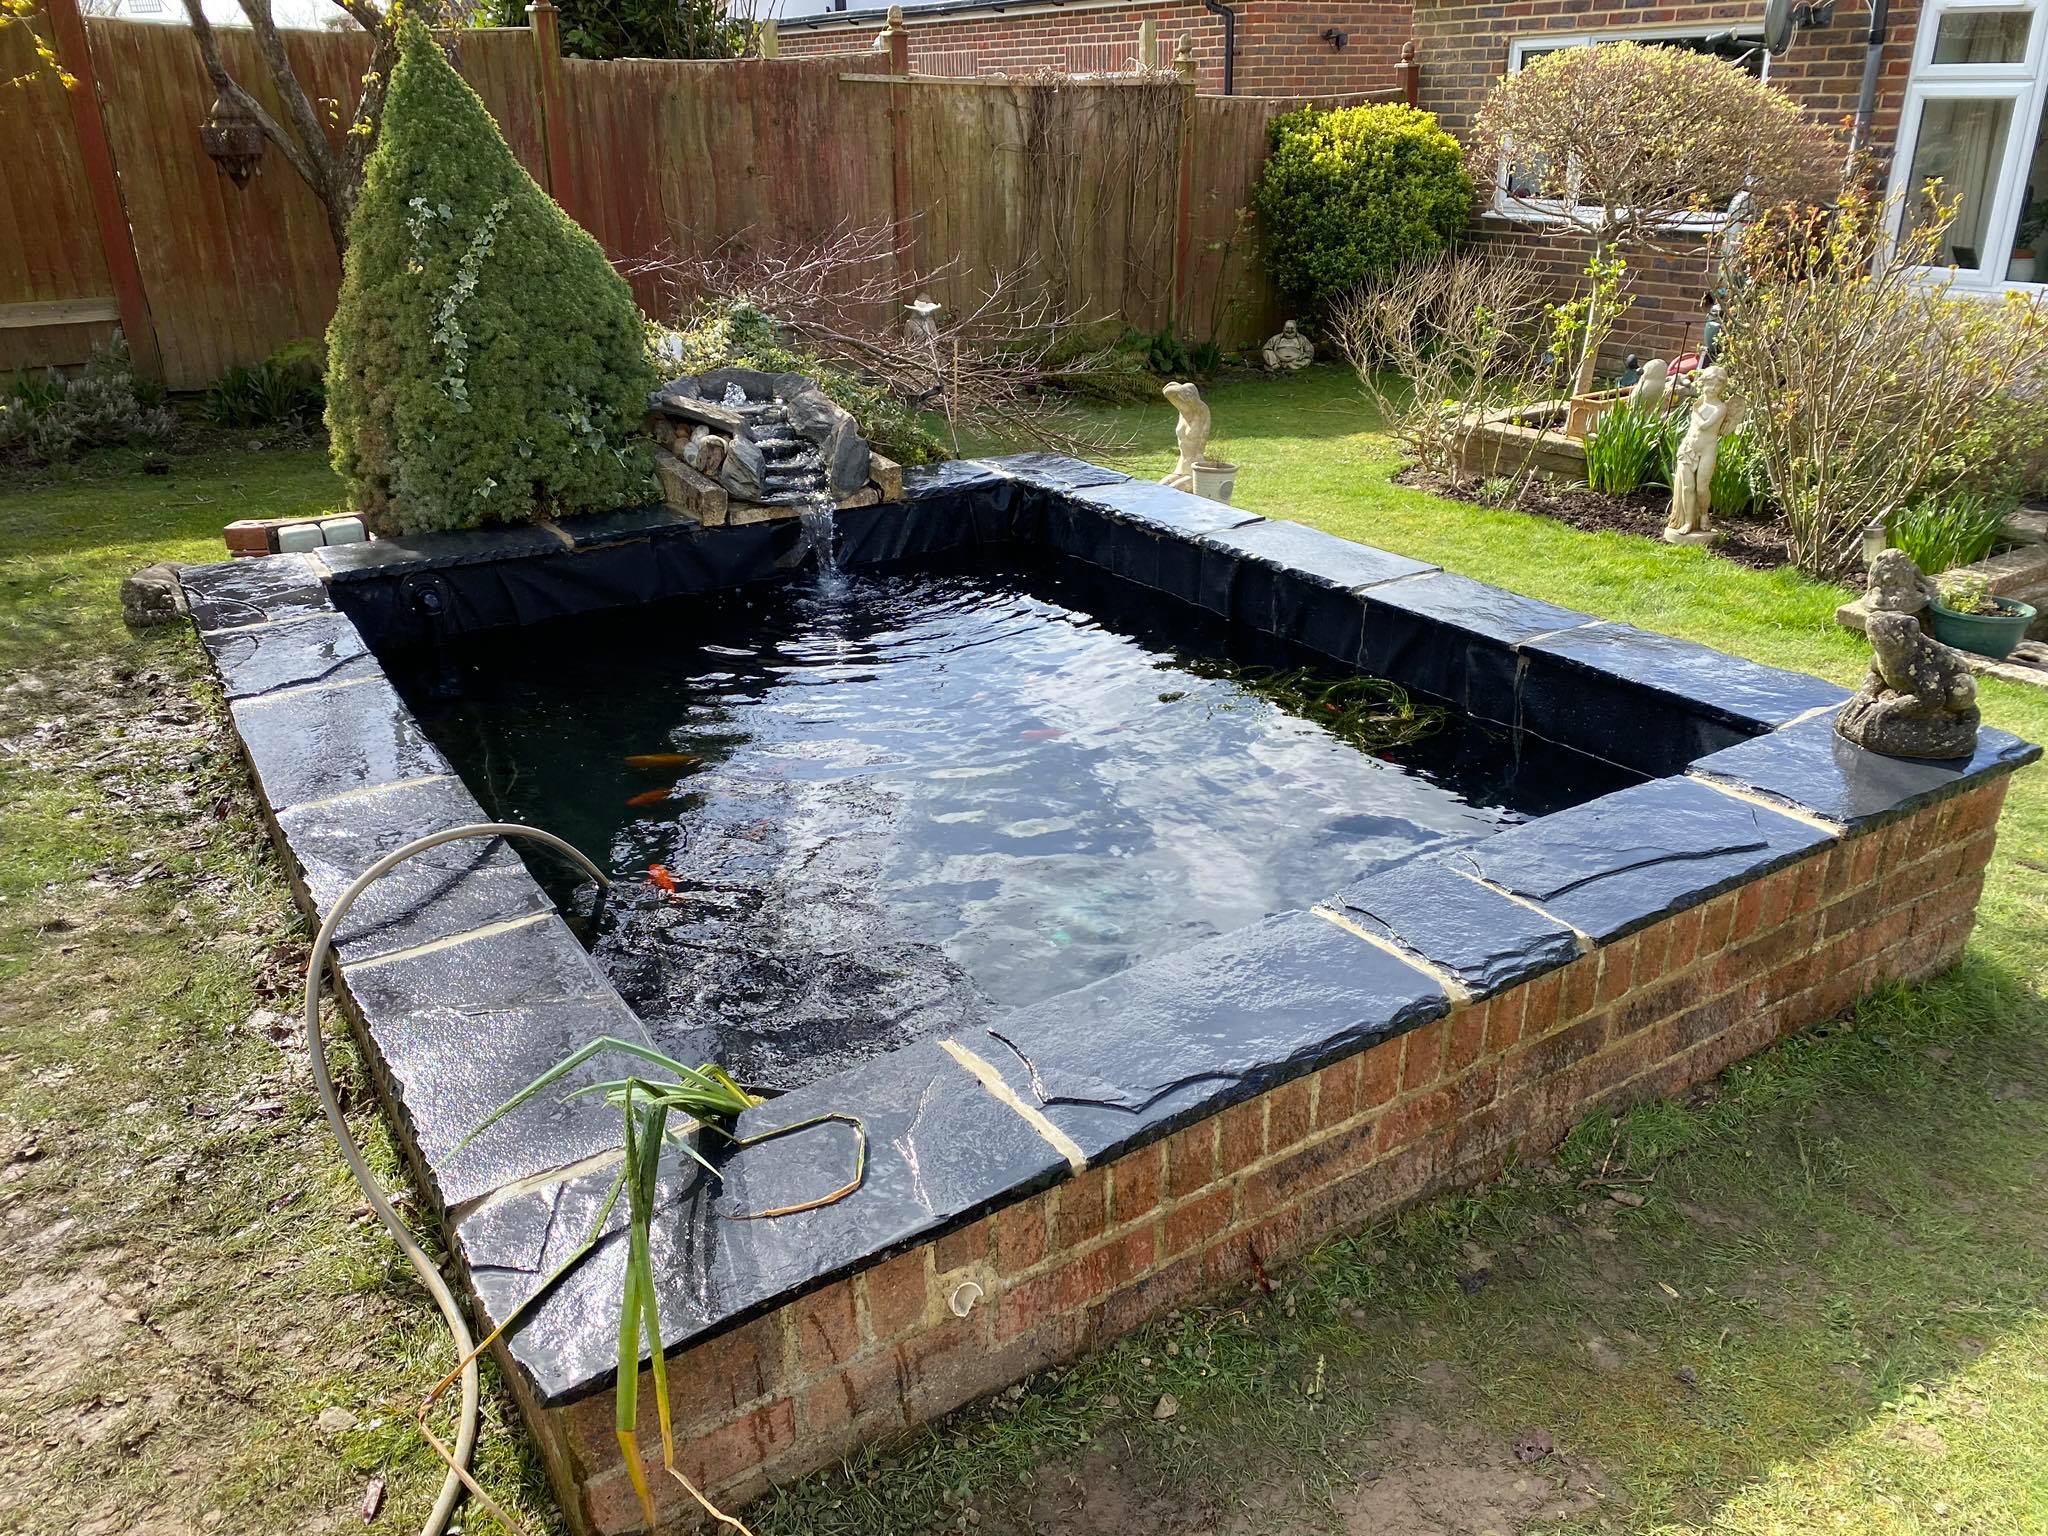 All ponds are looked after and cleaned in Horsham